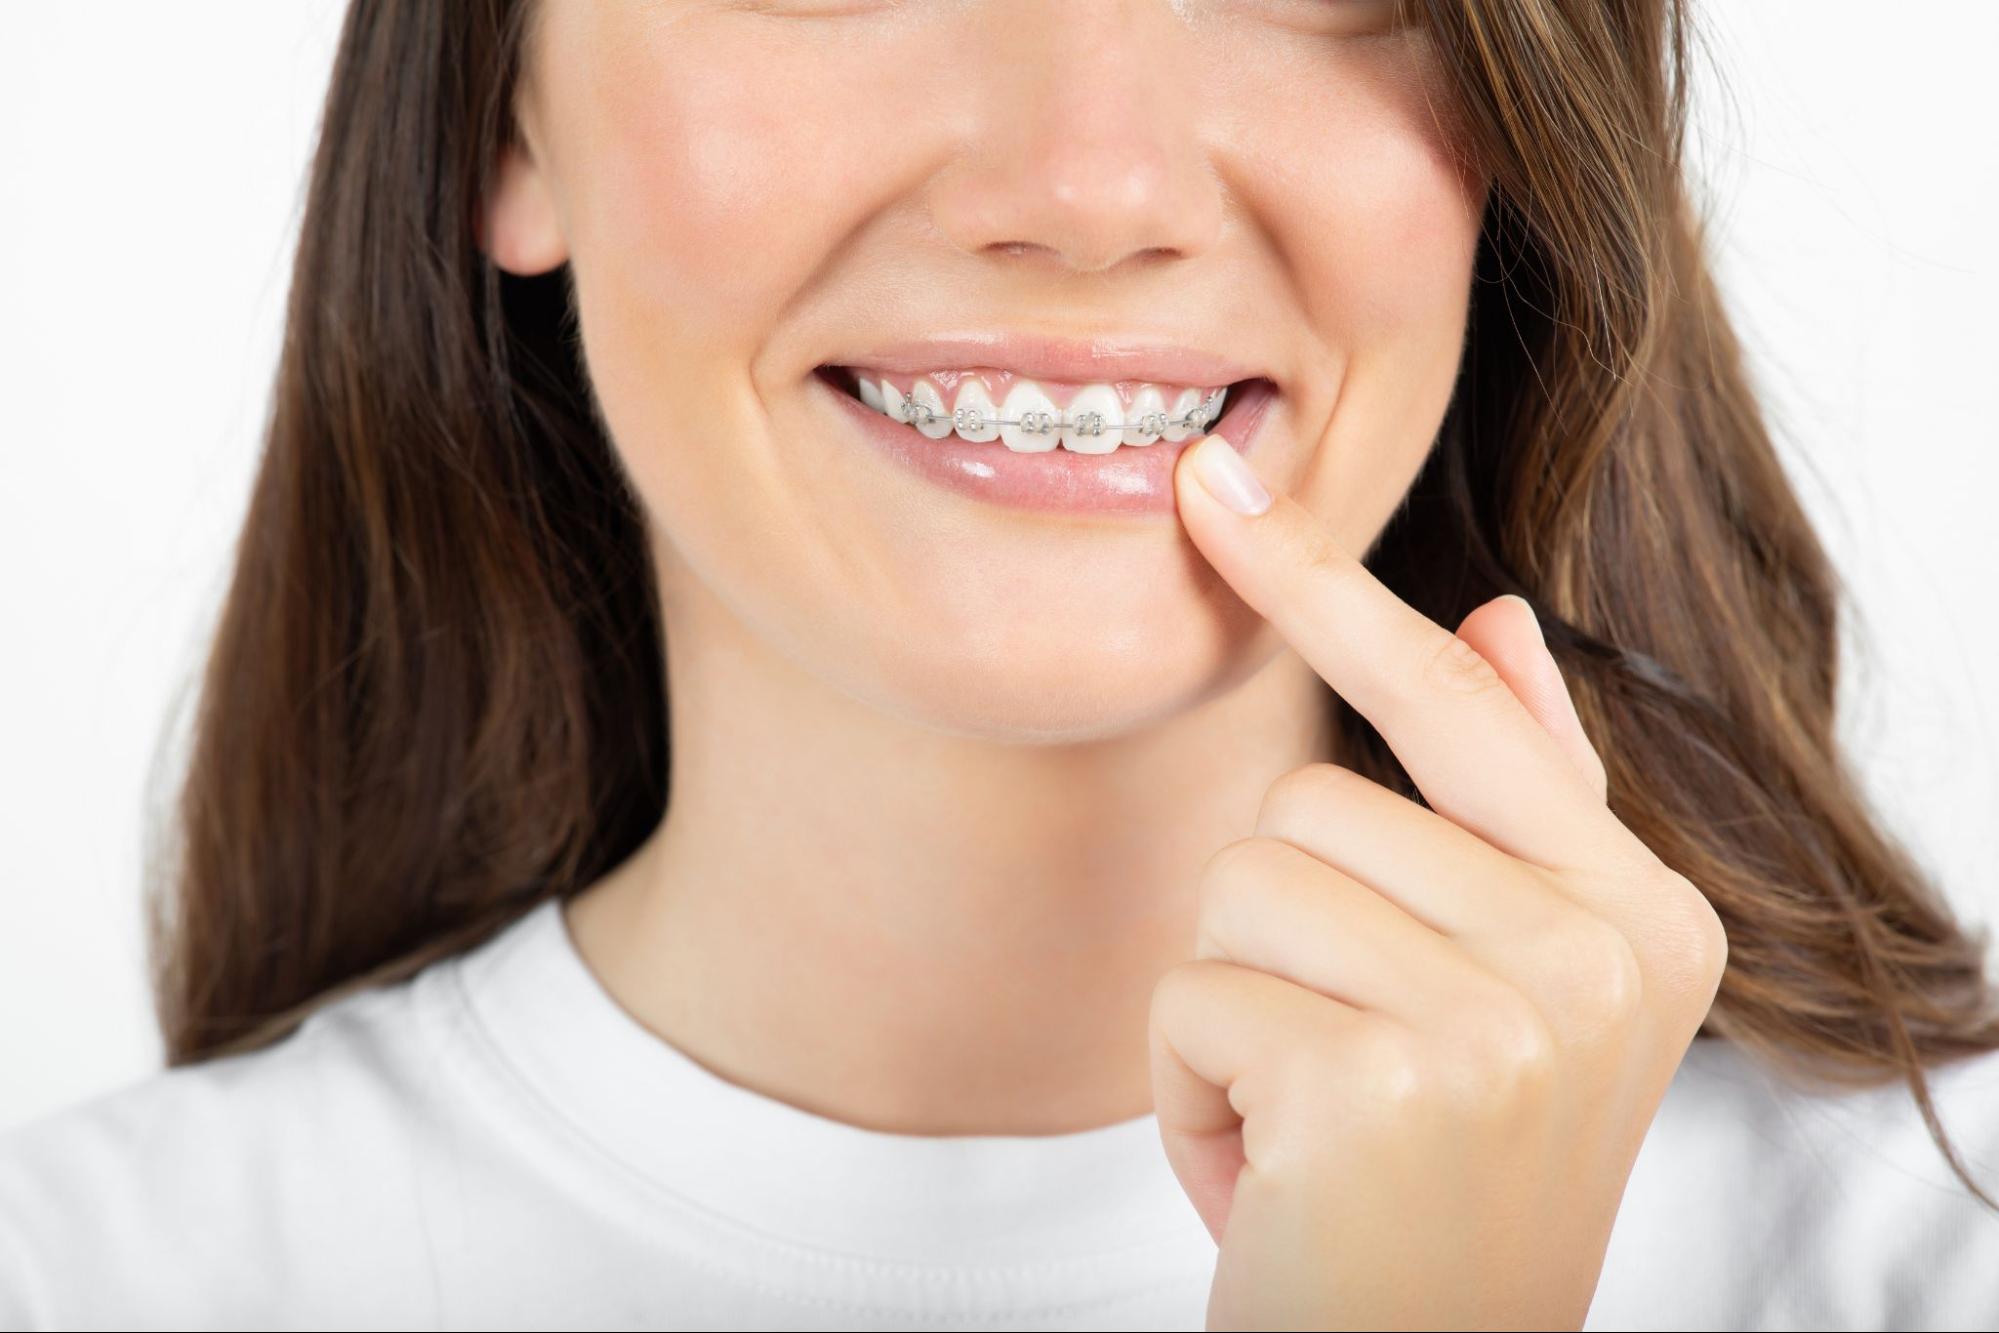 How Can I Prevent Tooth and Gum Issues While Wearing Braces?